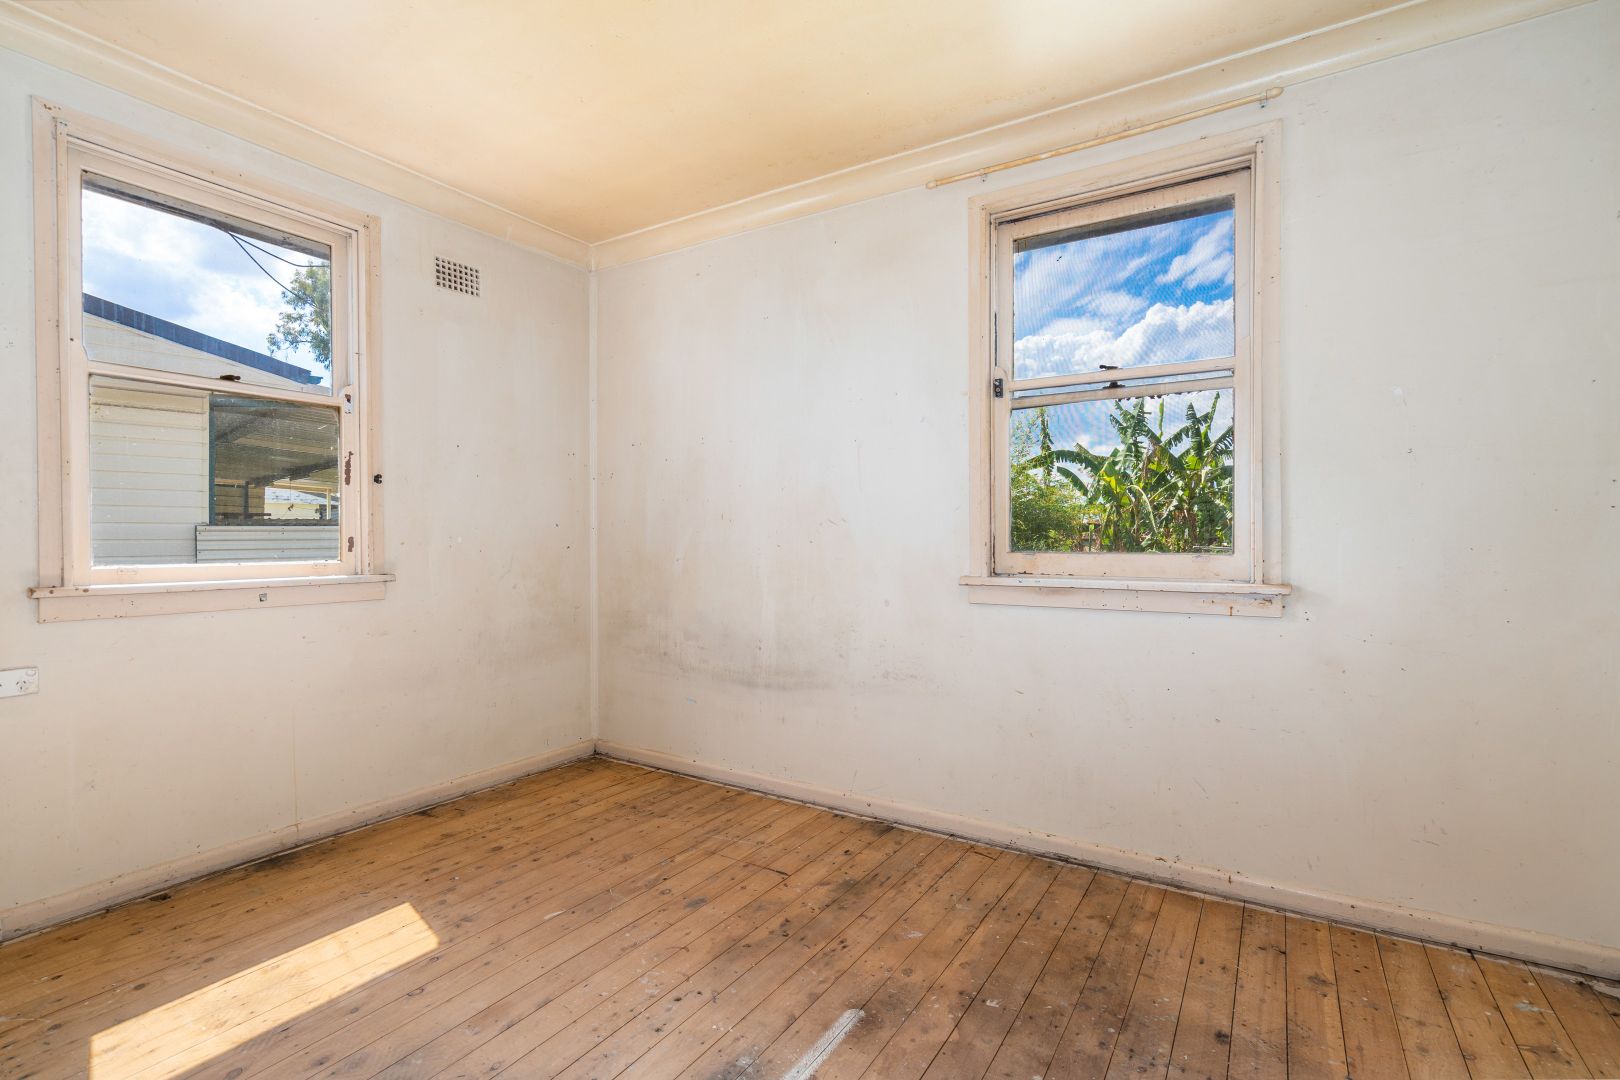 20 STEVENAGE ROAD, Canley Heights NSW 2166, Image 1